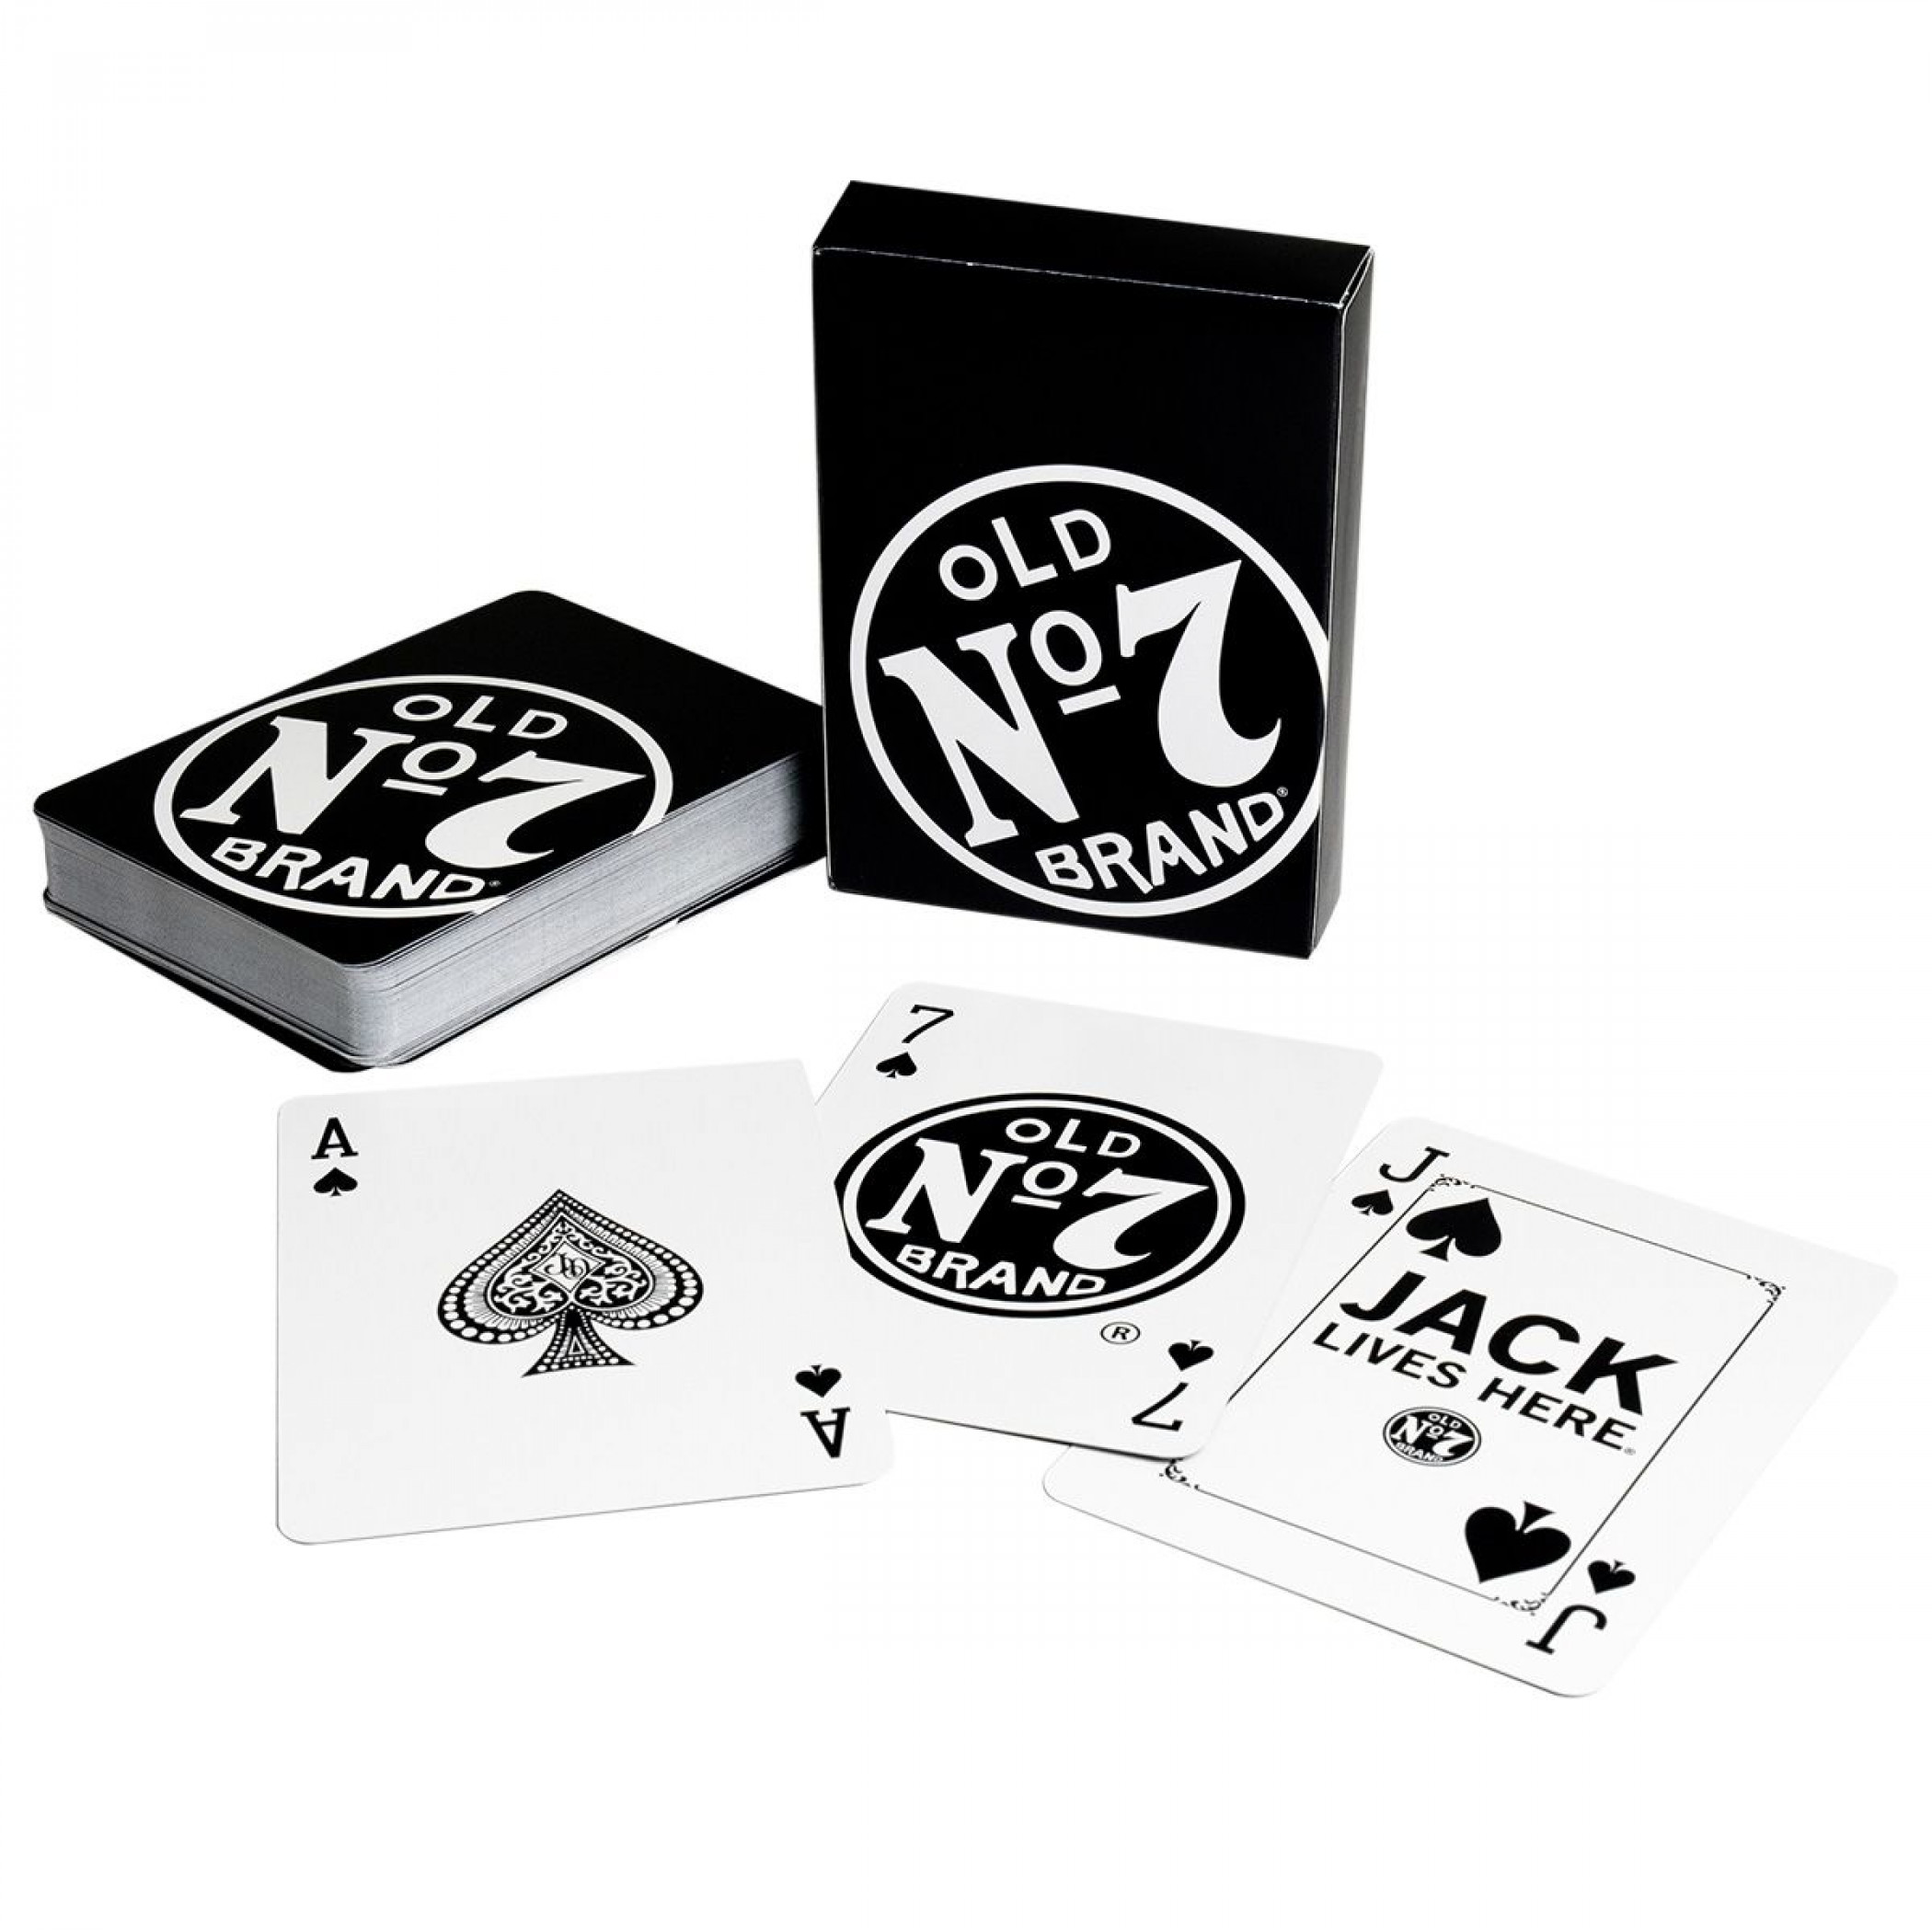 Jack Daniel's Old No. 7 Deck of Playing Cards